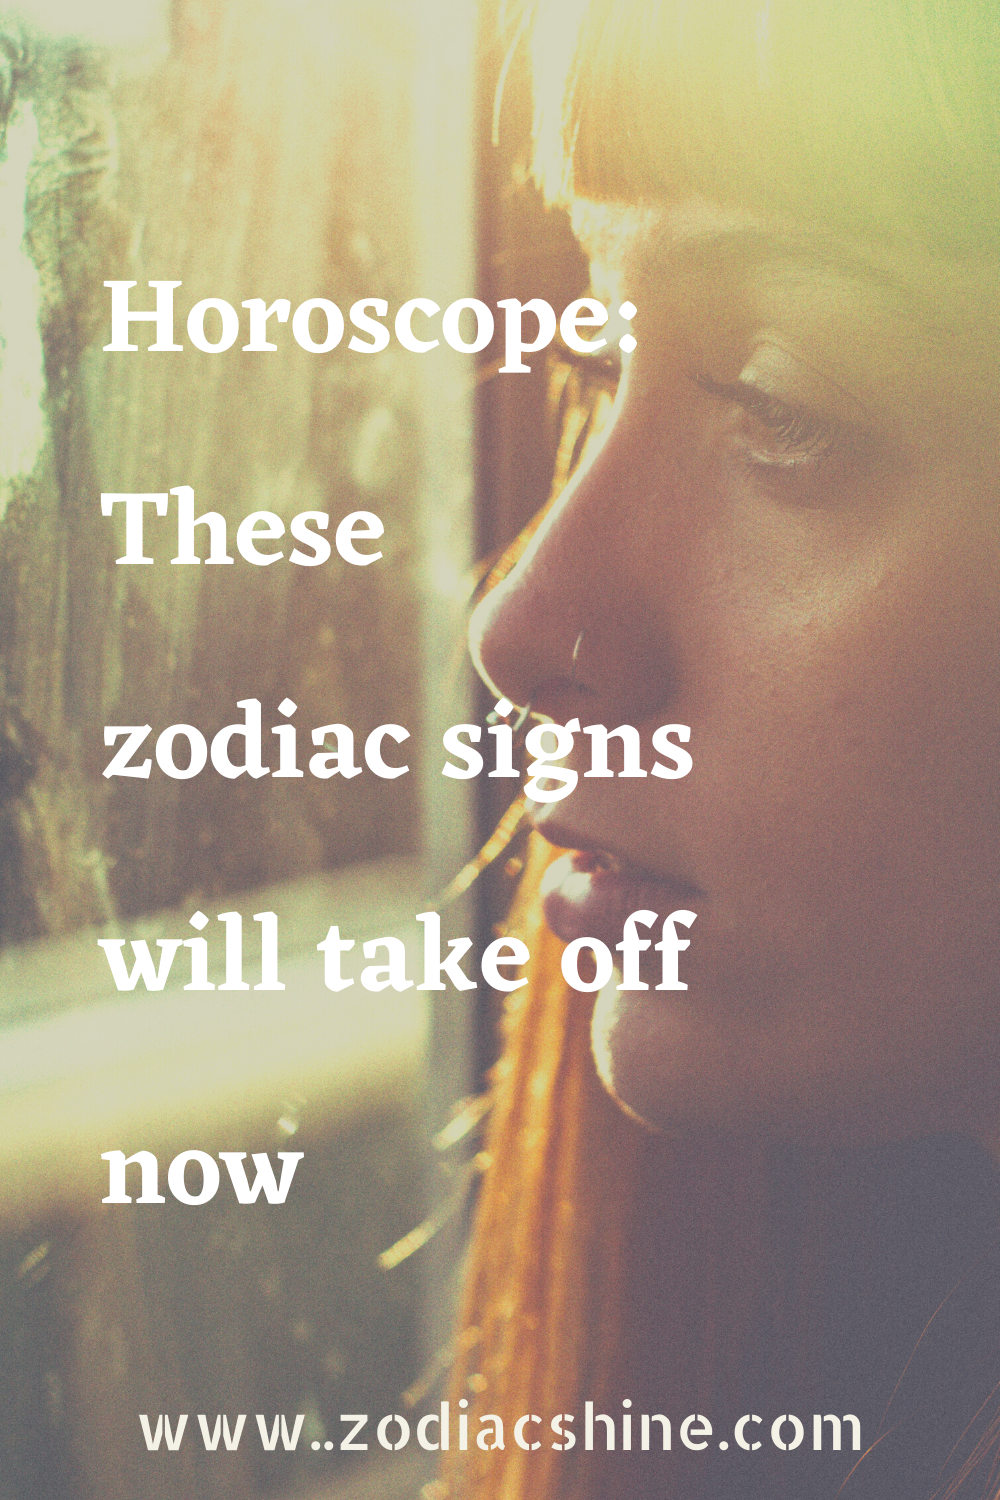 Horoscope: These zodiac signs will take off now